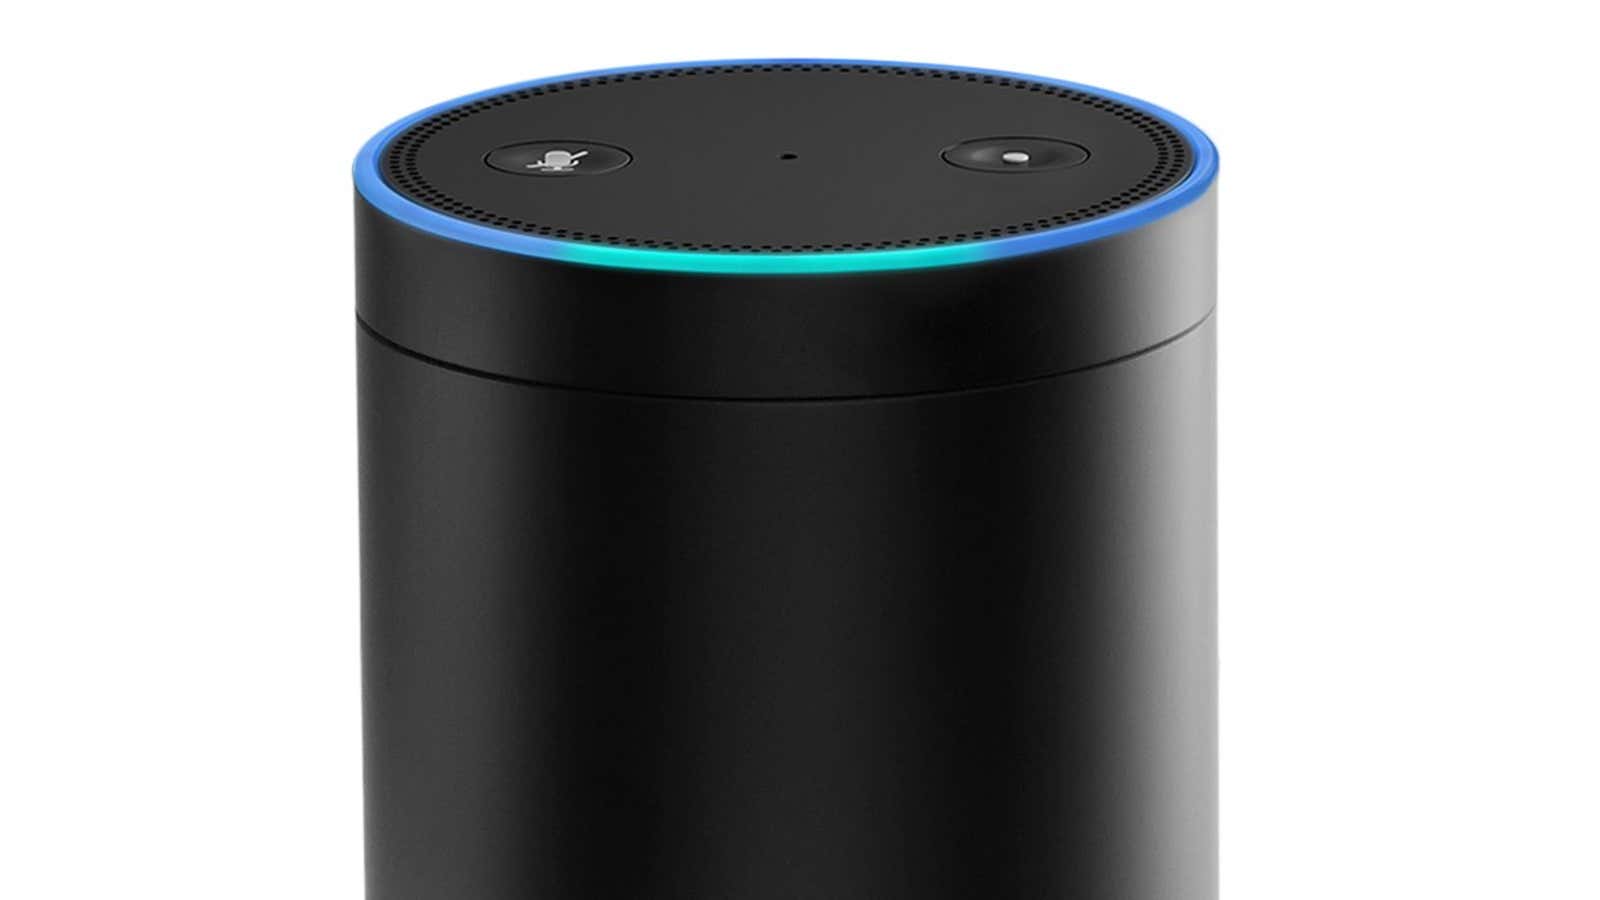 Amazon Echo is a sleeper hit, and the rest of America is about to find out about it for the first time